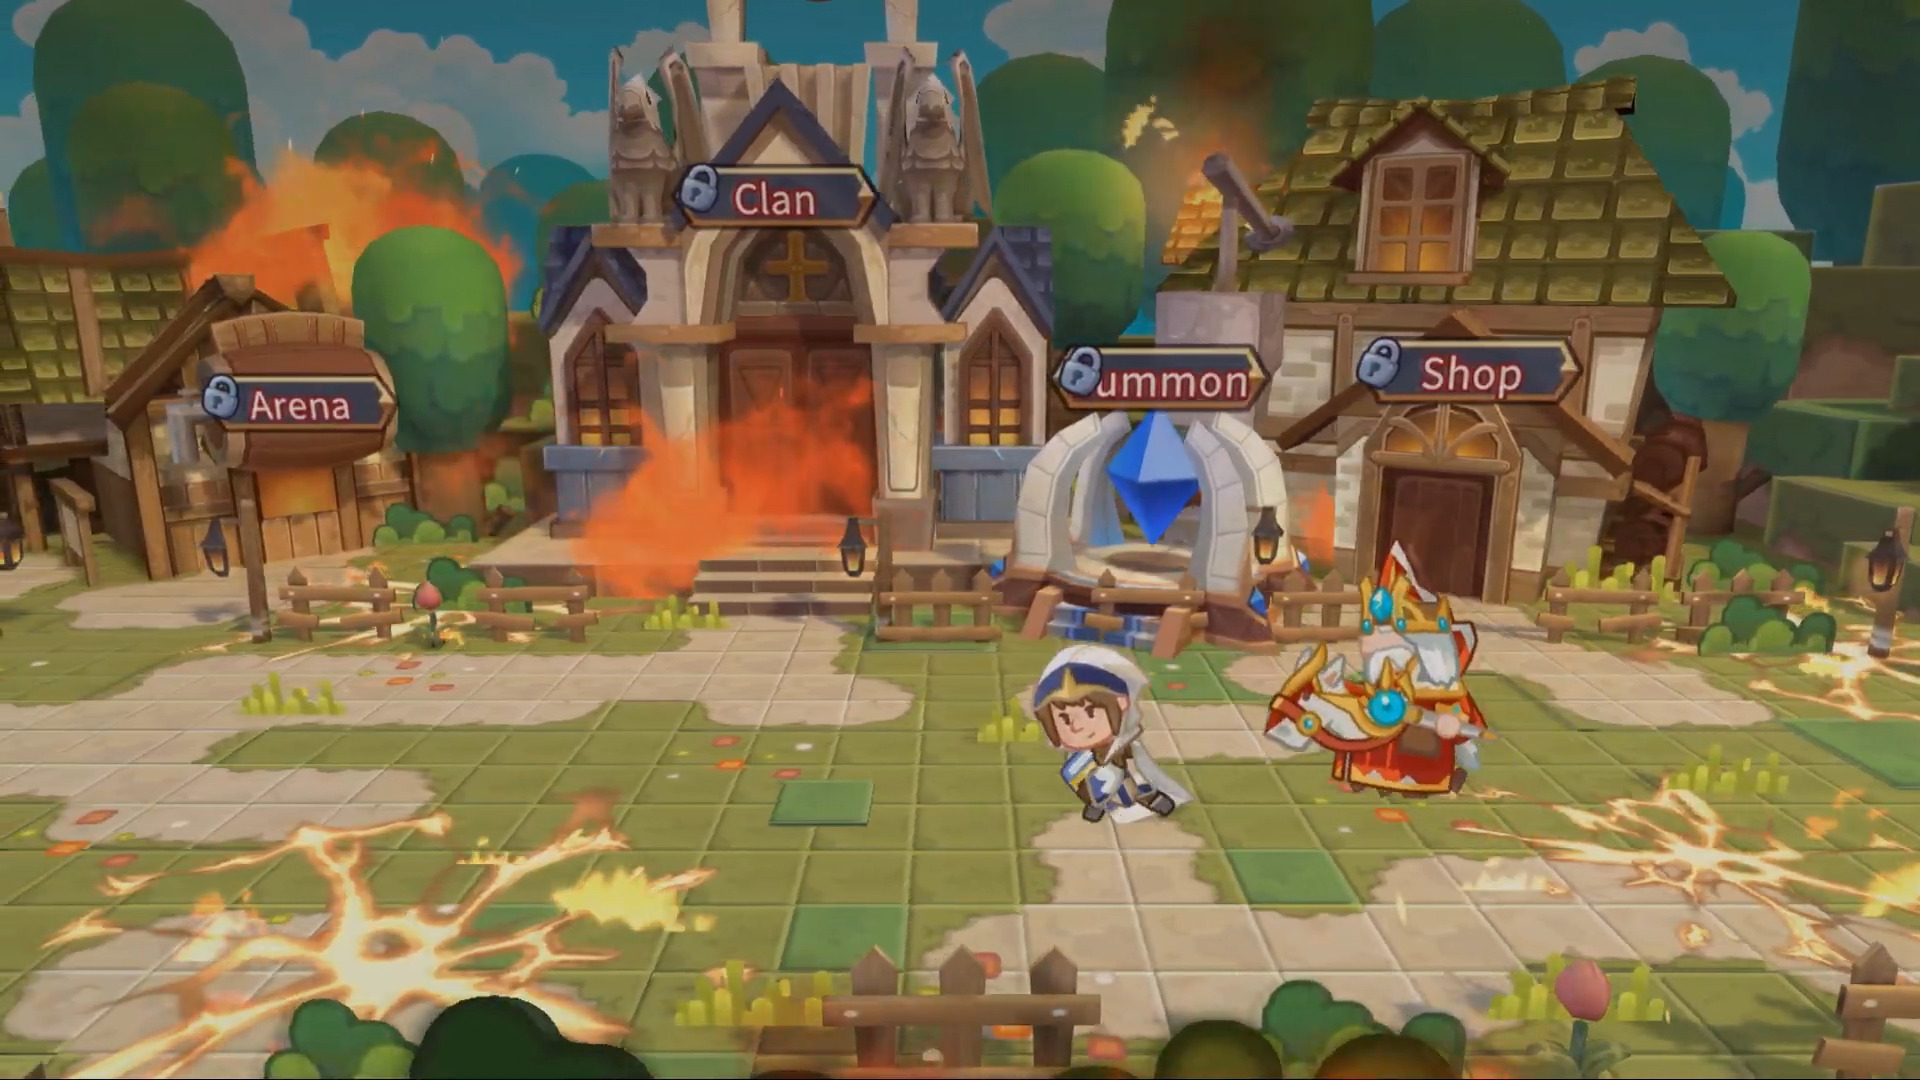 Monster Knights - Action RPG - Android game screenshots.